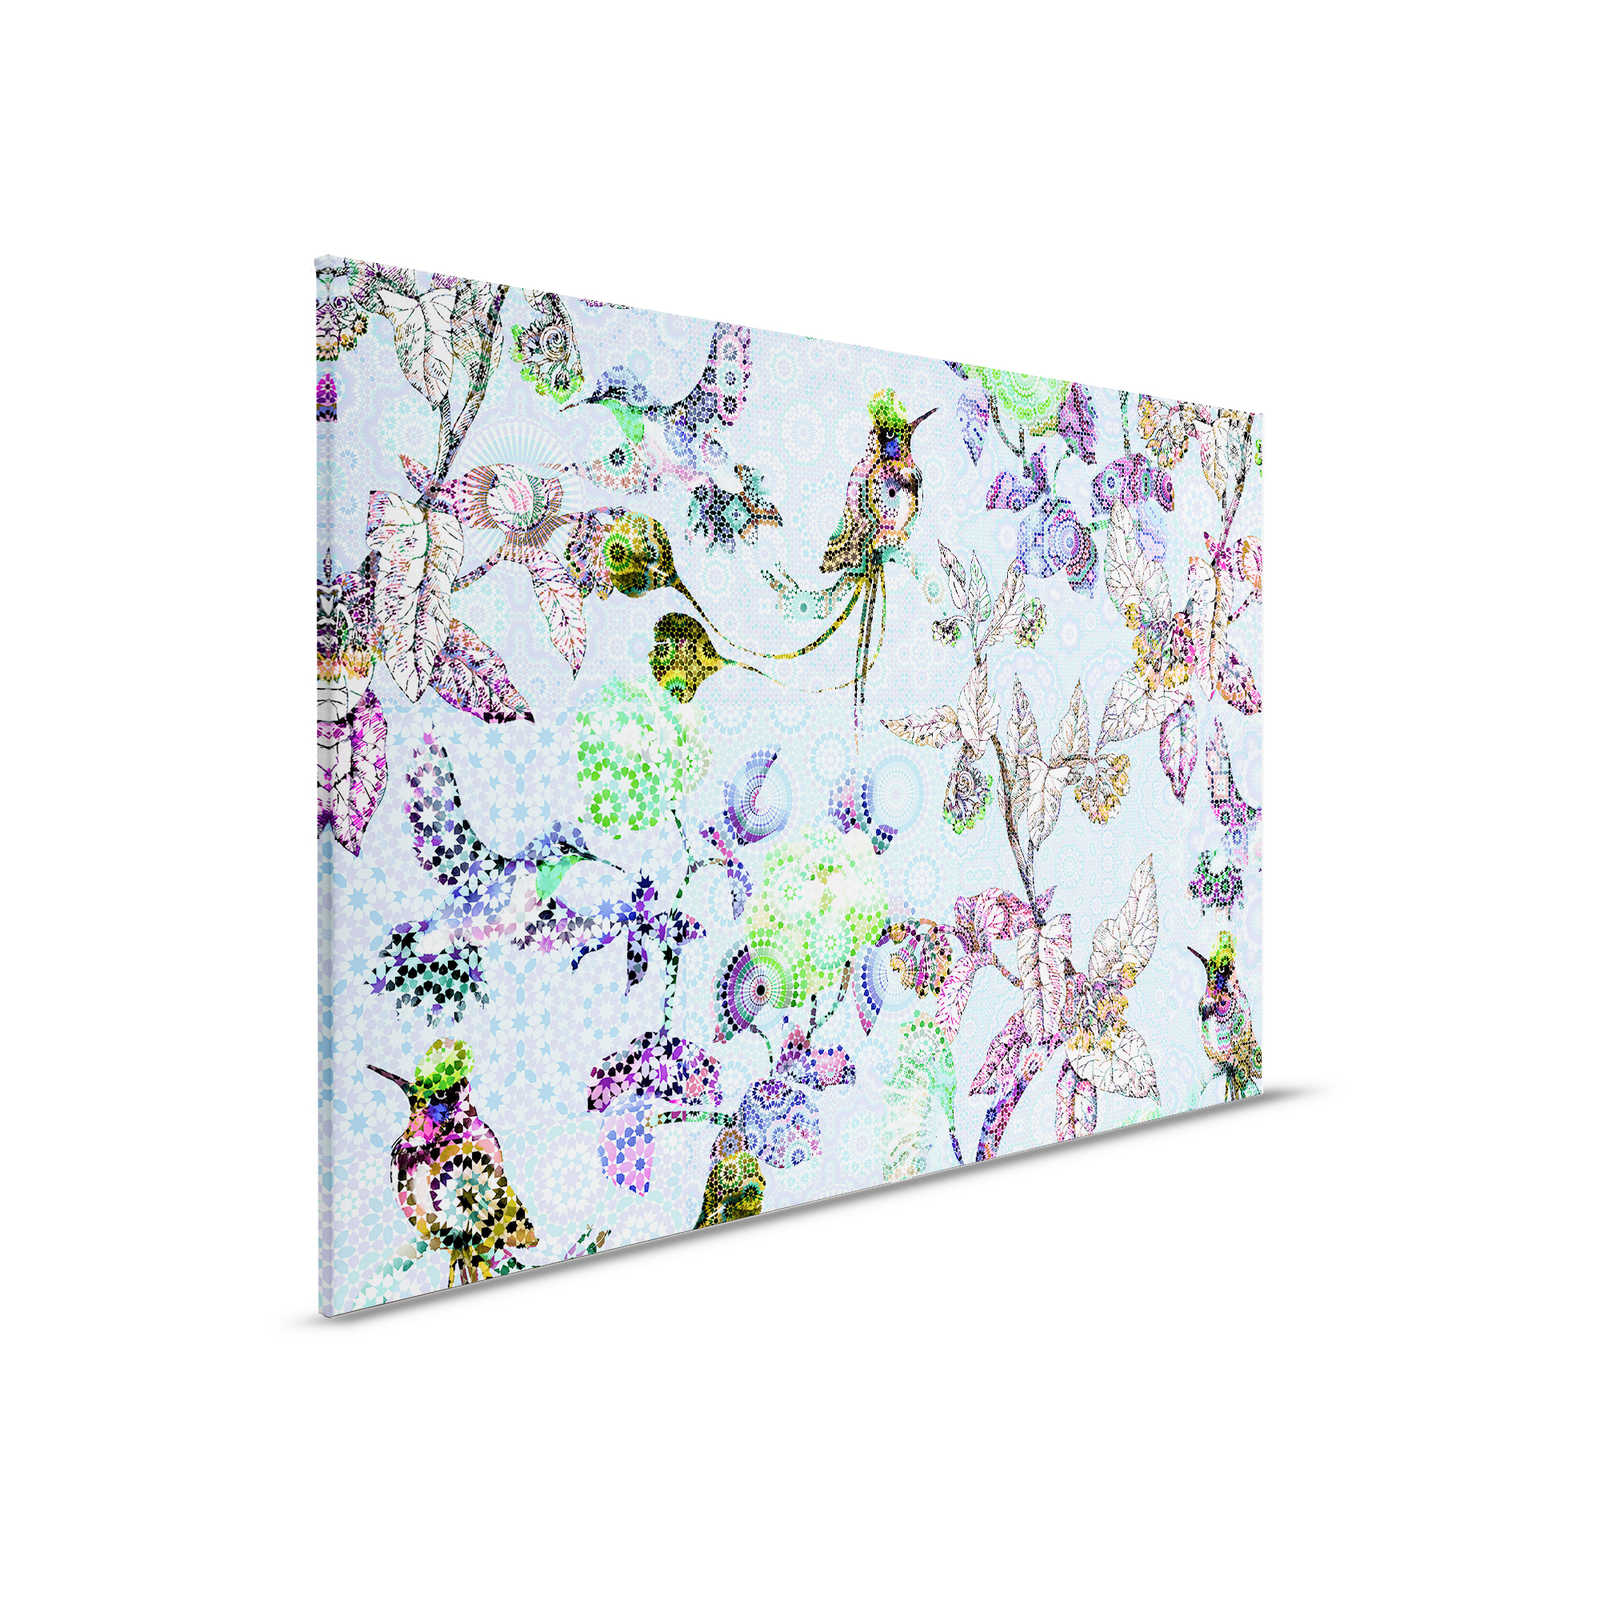         Canvas painting Flowers & Birds in Mosaic Style - 0,90 m x 0,60 m
    